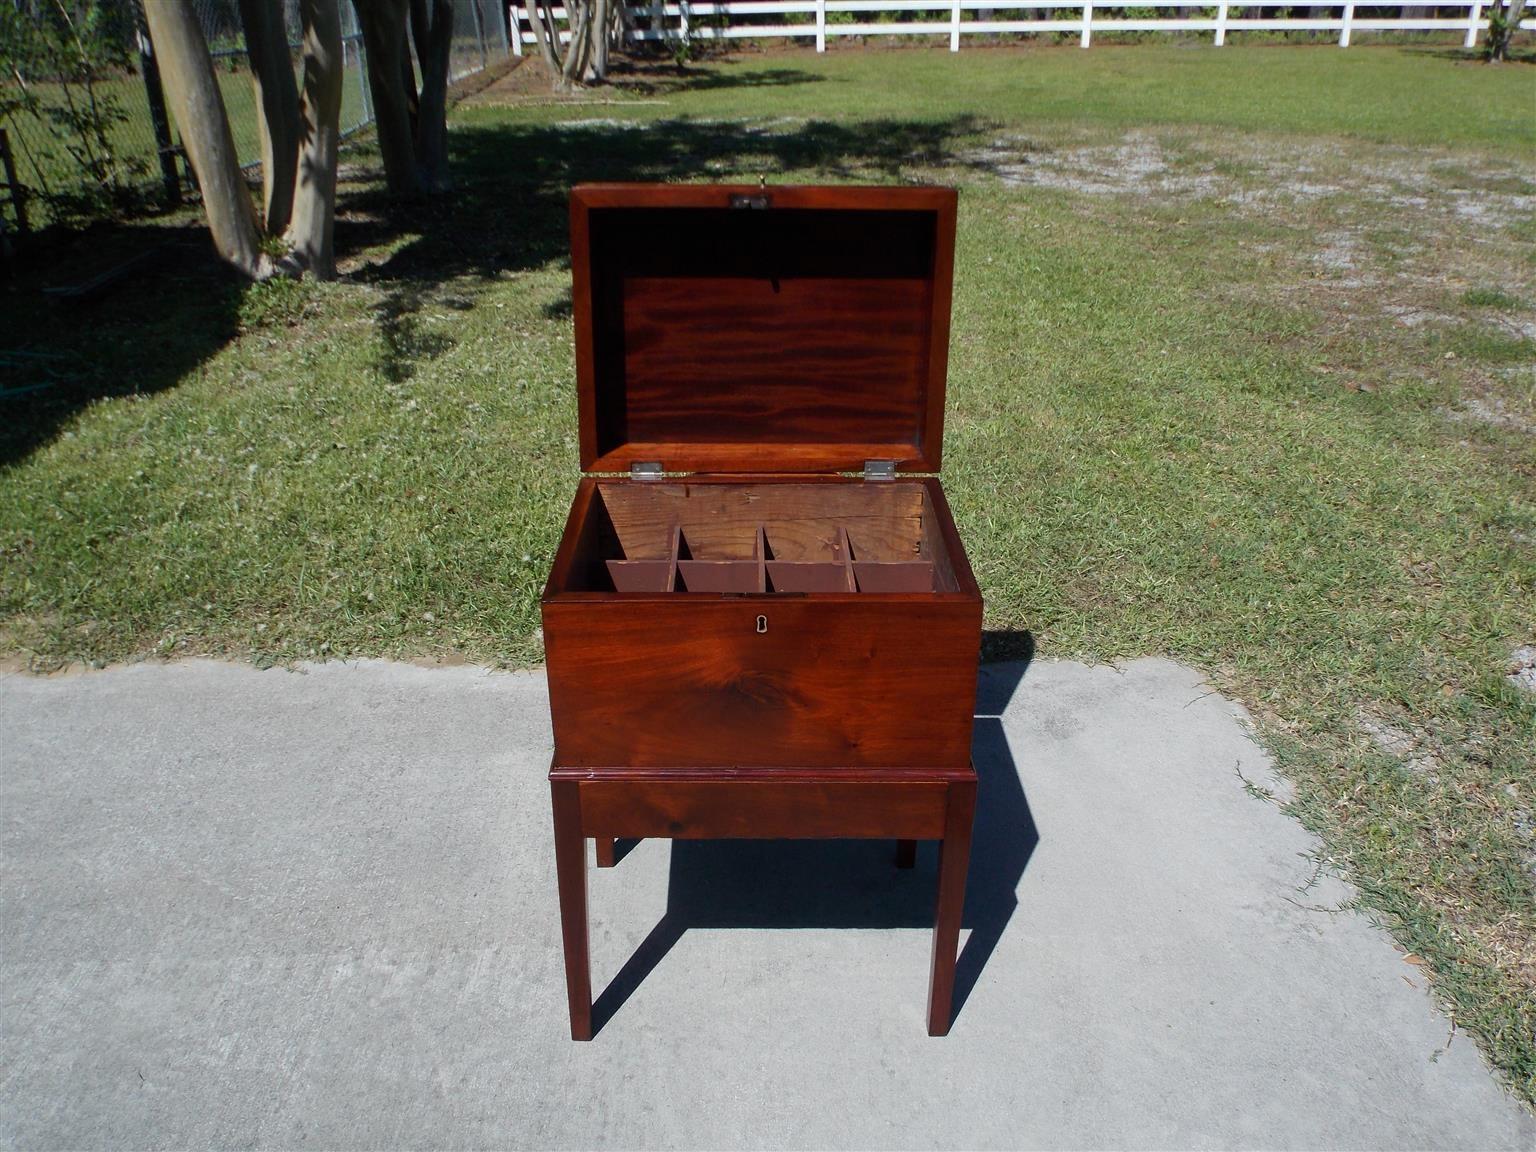 American mahogany hinged bottle box on stand with exposed dovetails, interior dividers, original brass side handles, and centered brass knob with original locking key. Early 19th century.